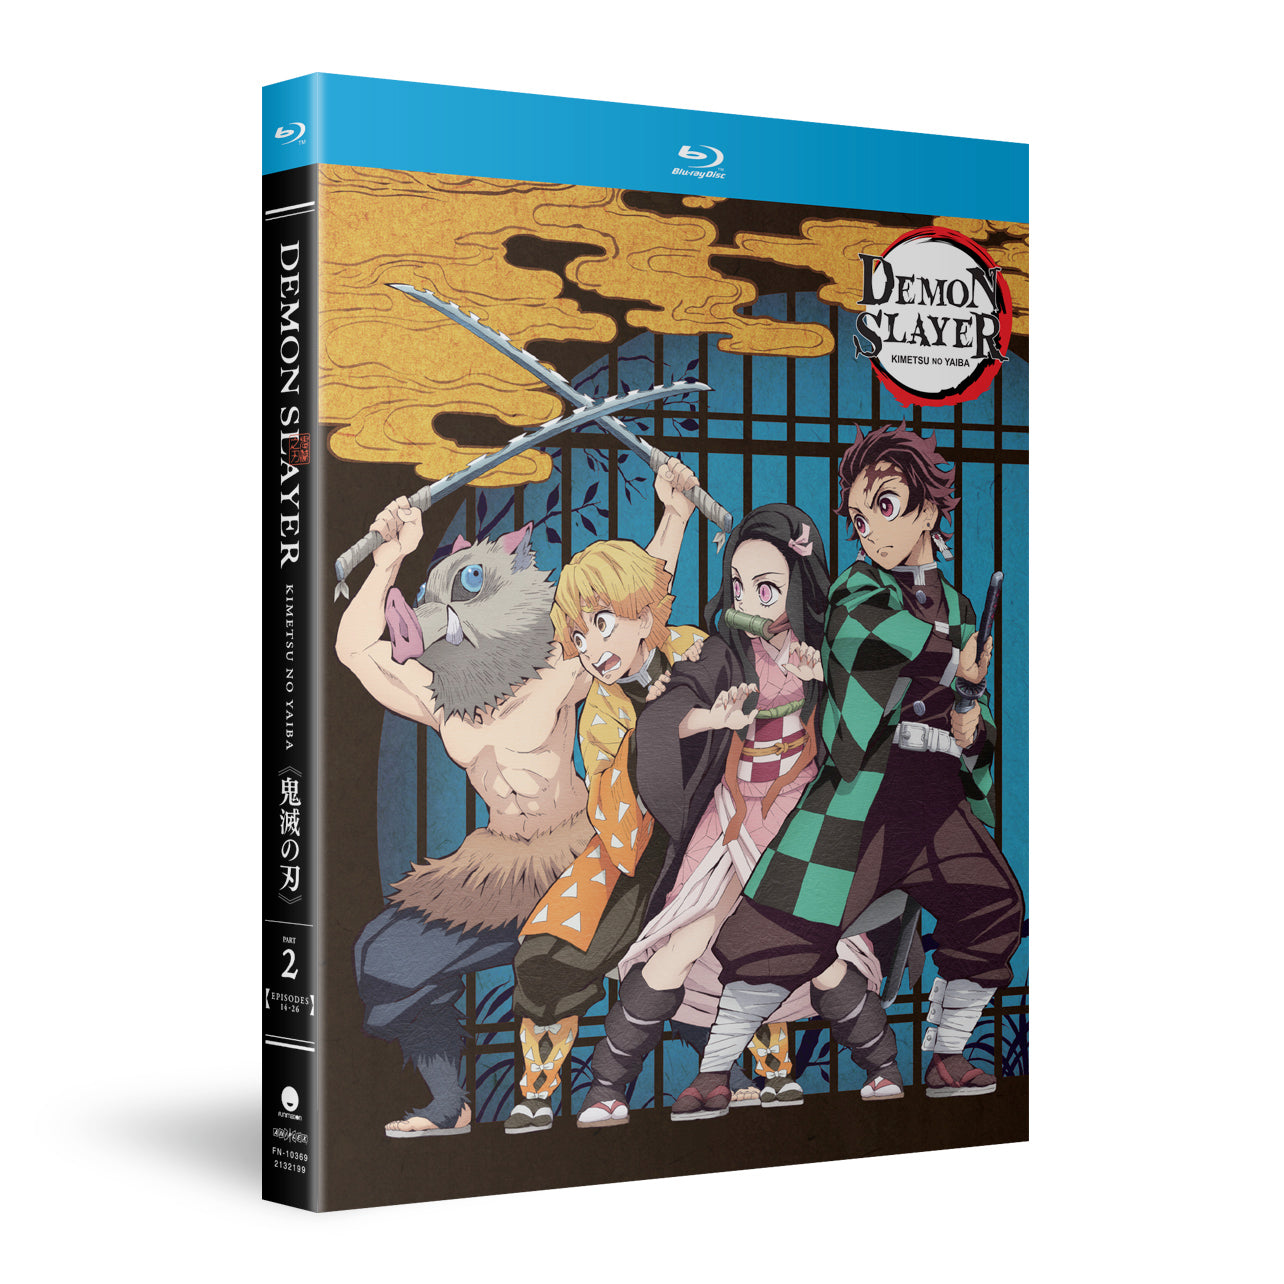 Demon Slayer - Part 2 - Standard Edition - Blu-ray image count 1